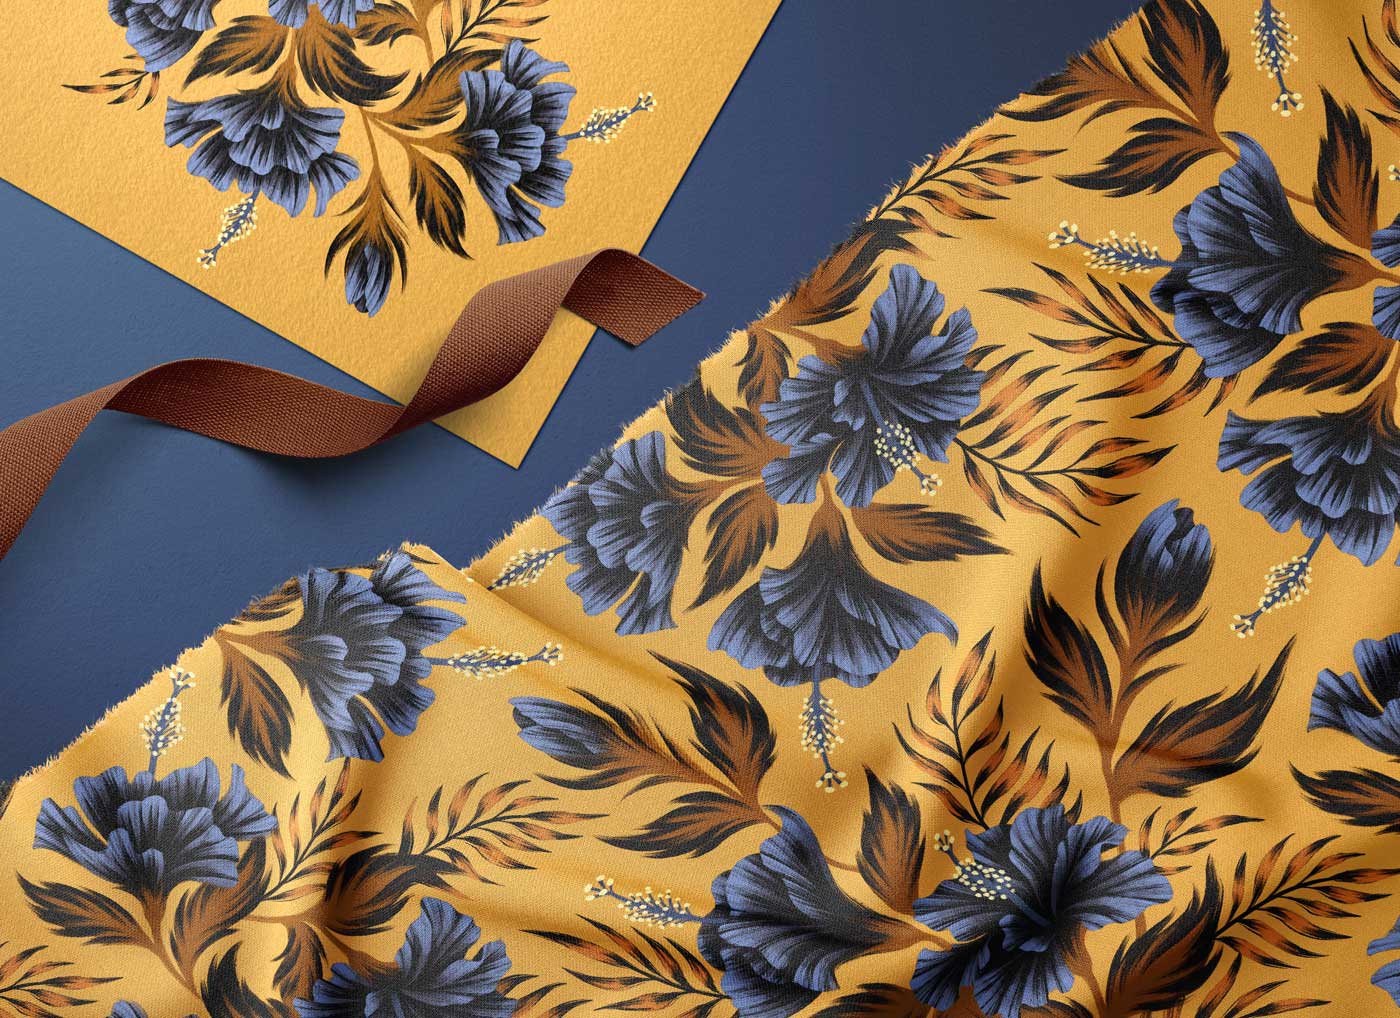 Hibiscus floral navy and mustard fabric with art print by Andrea Muller